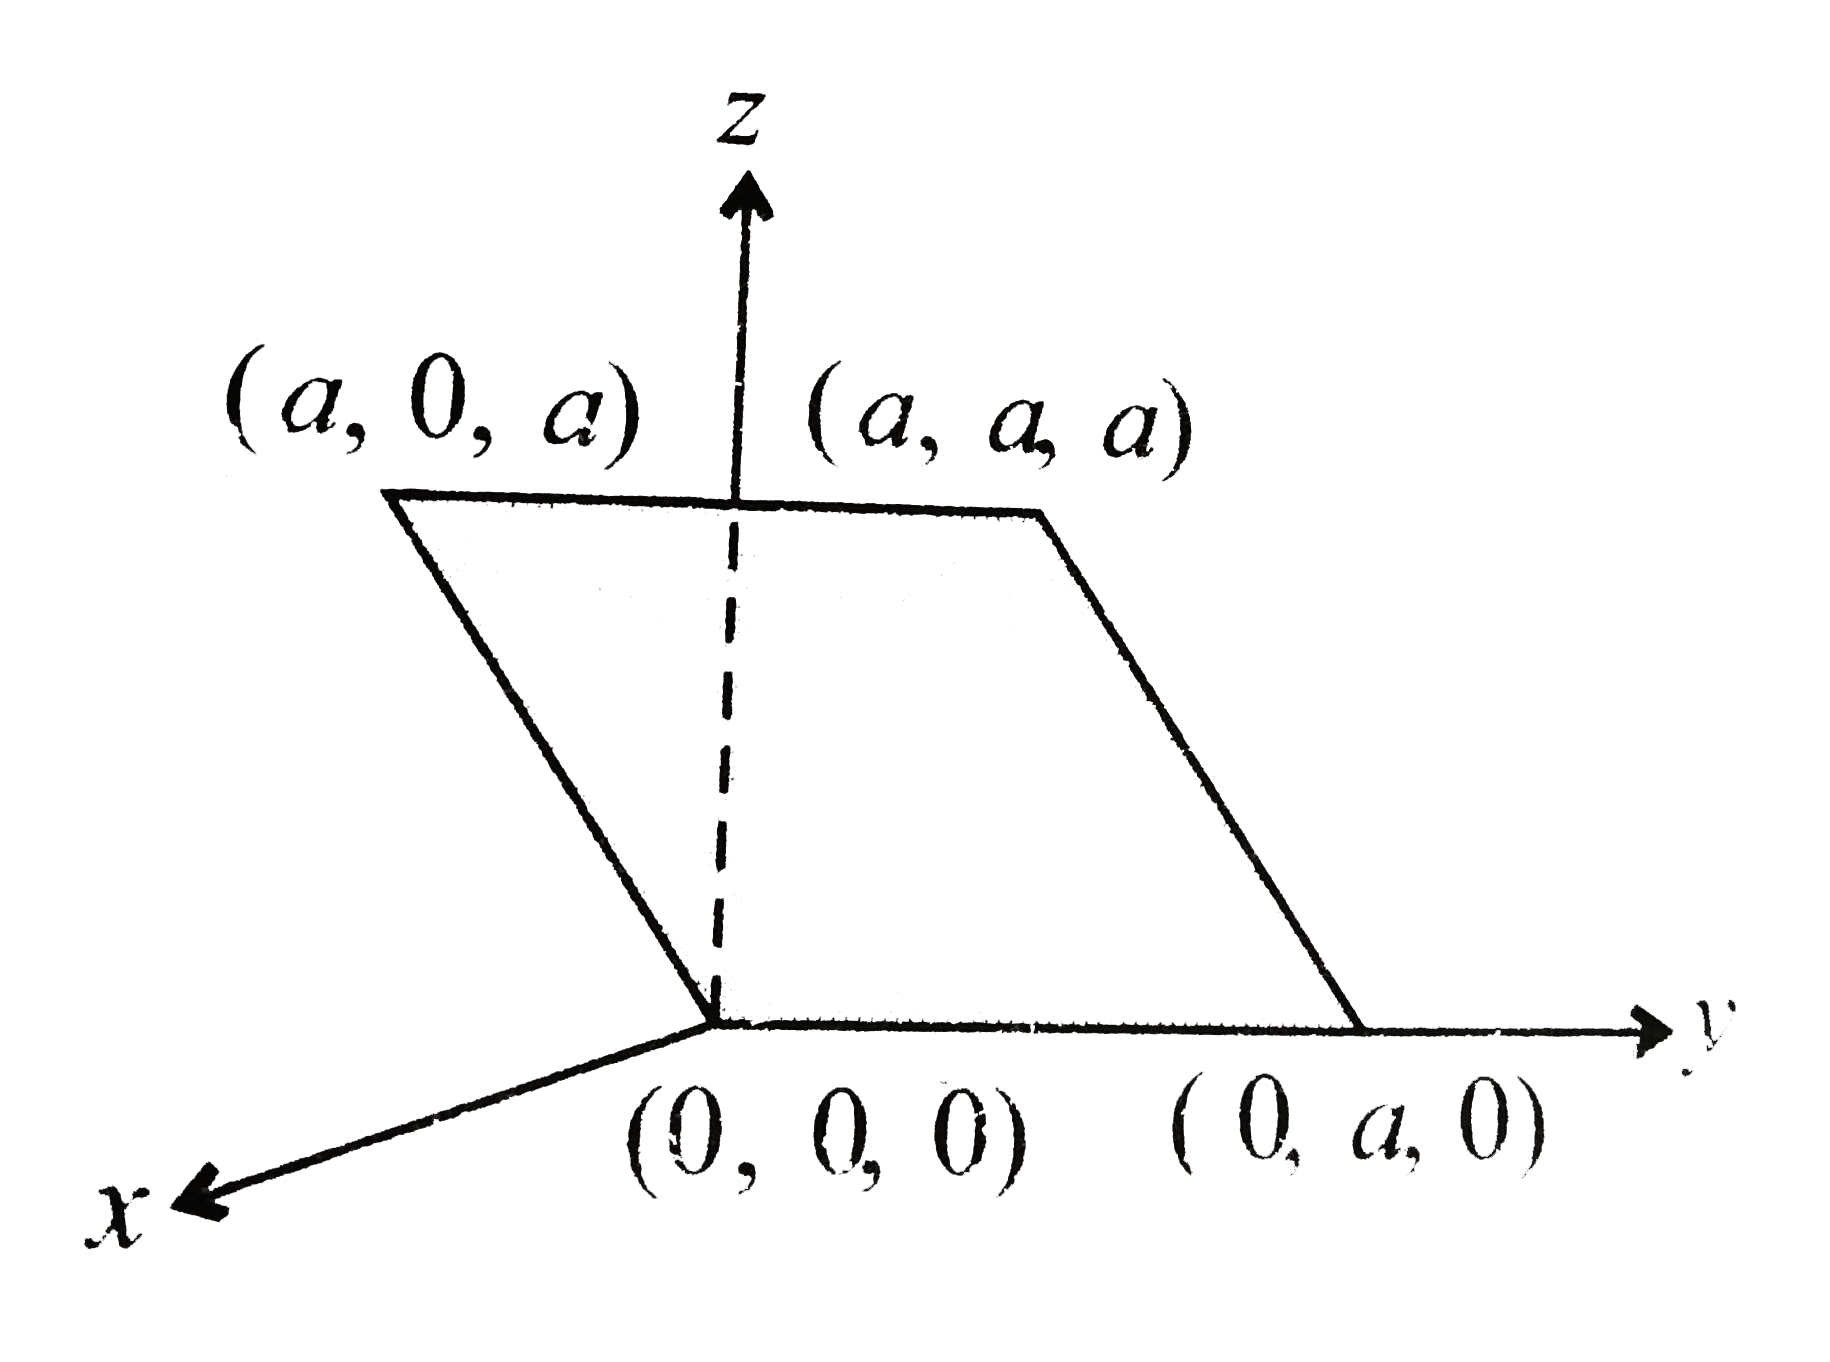 Consider an electric field vecE = E0hat x, where E0 is a constant. The flux through the shaded area (as shown in the figure) due to this field is